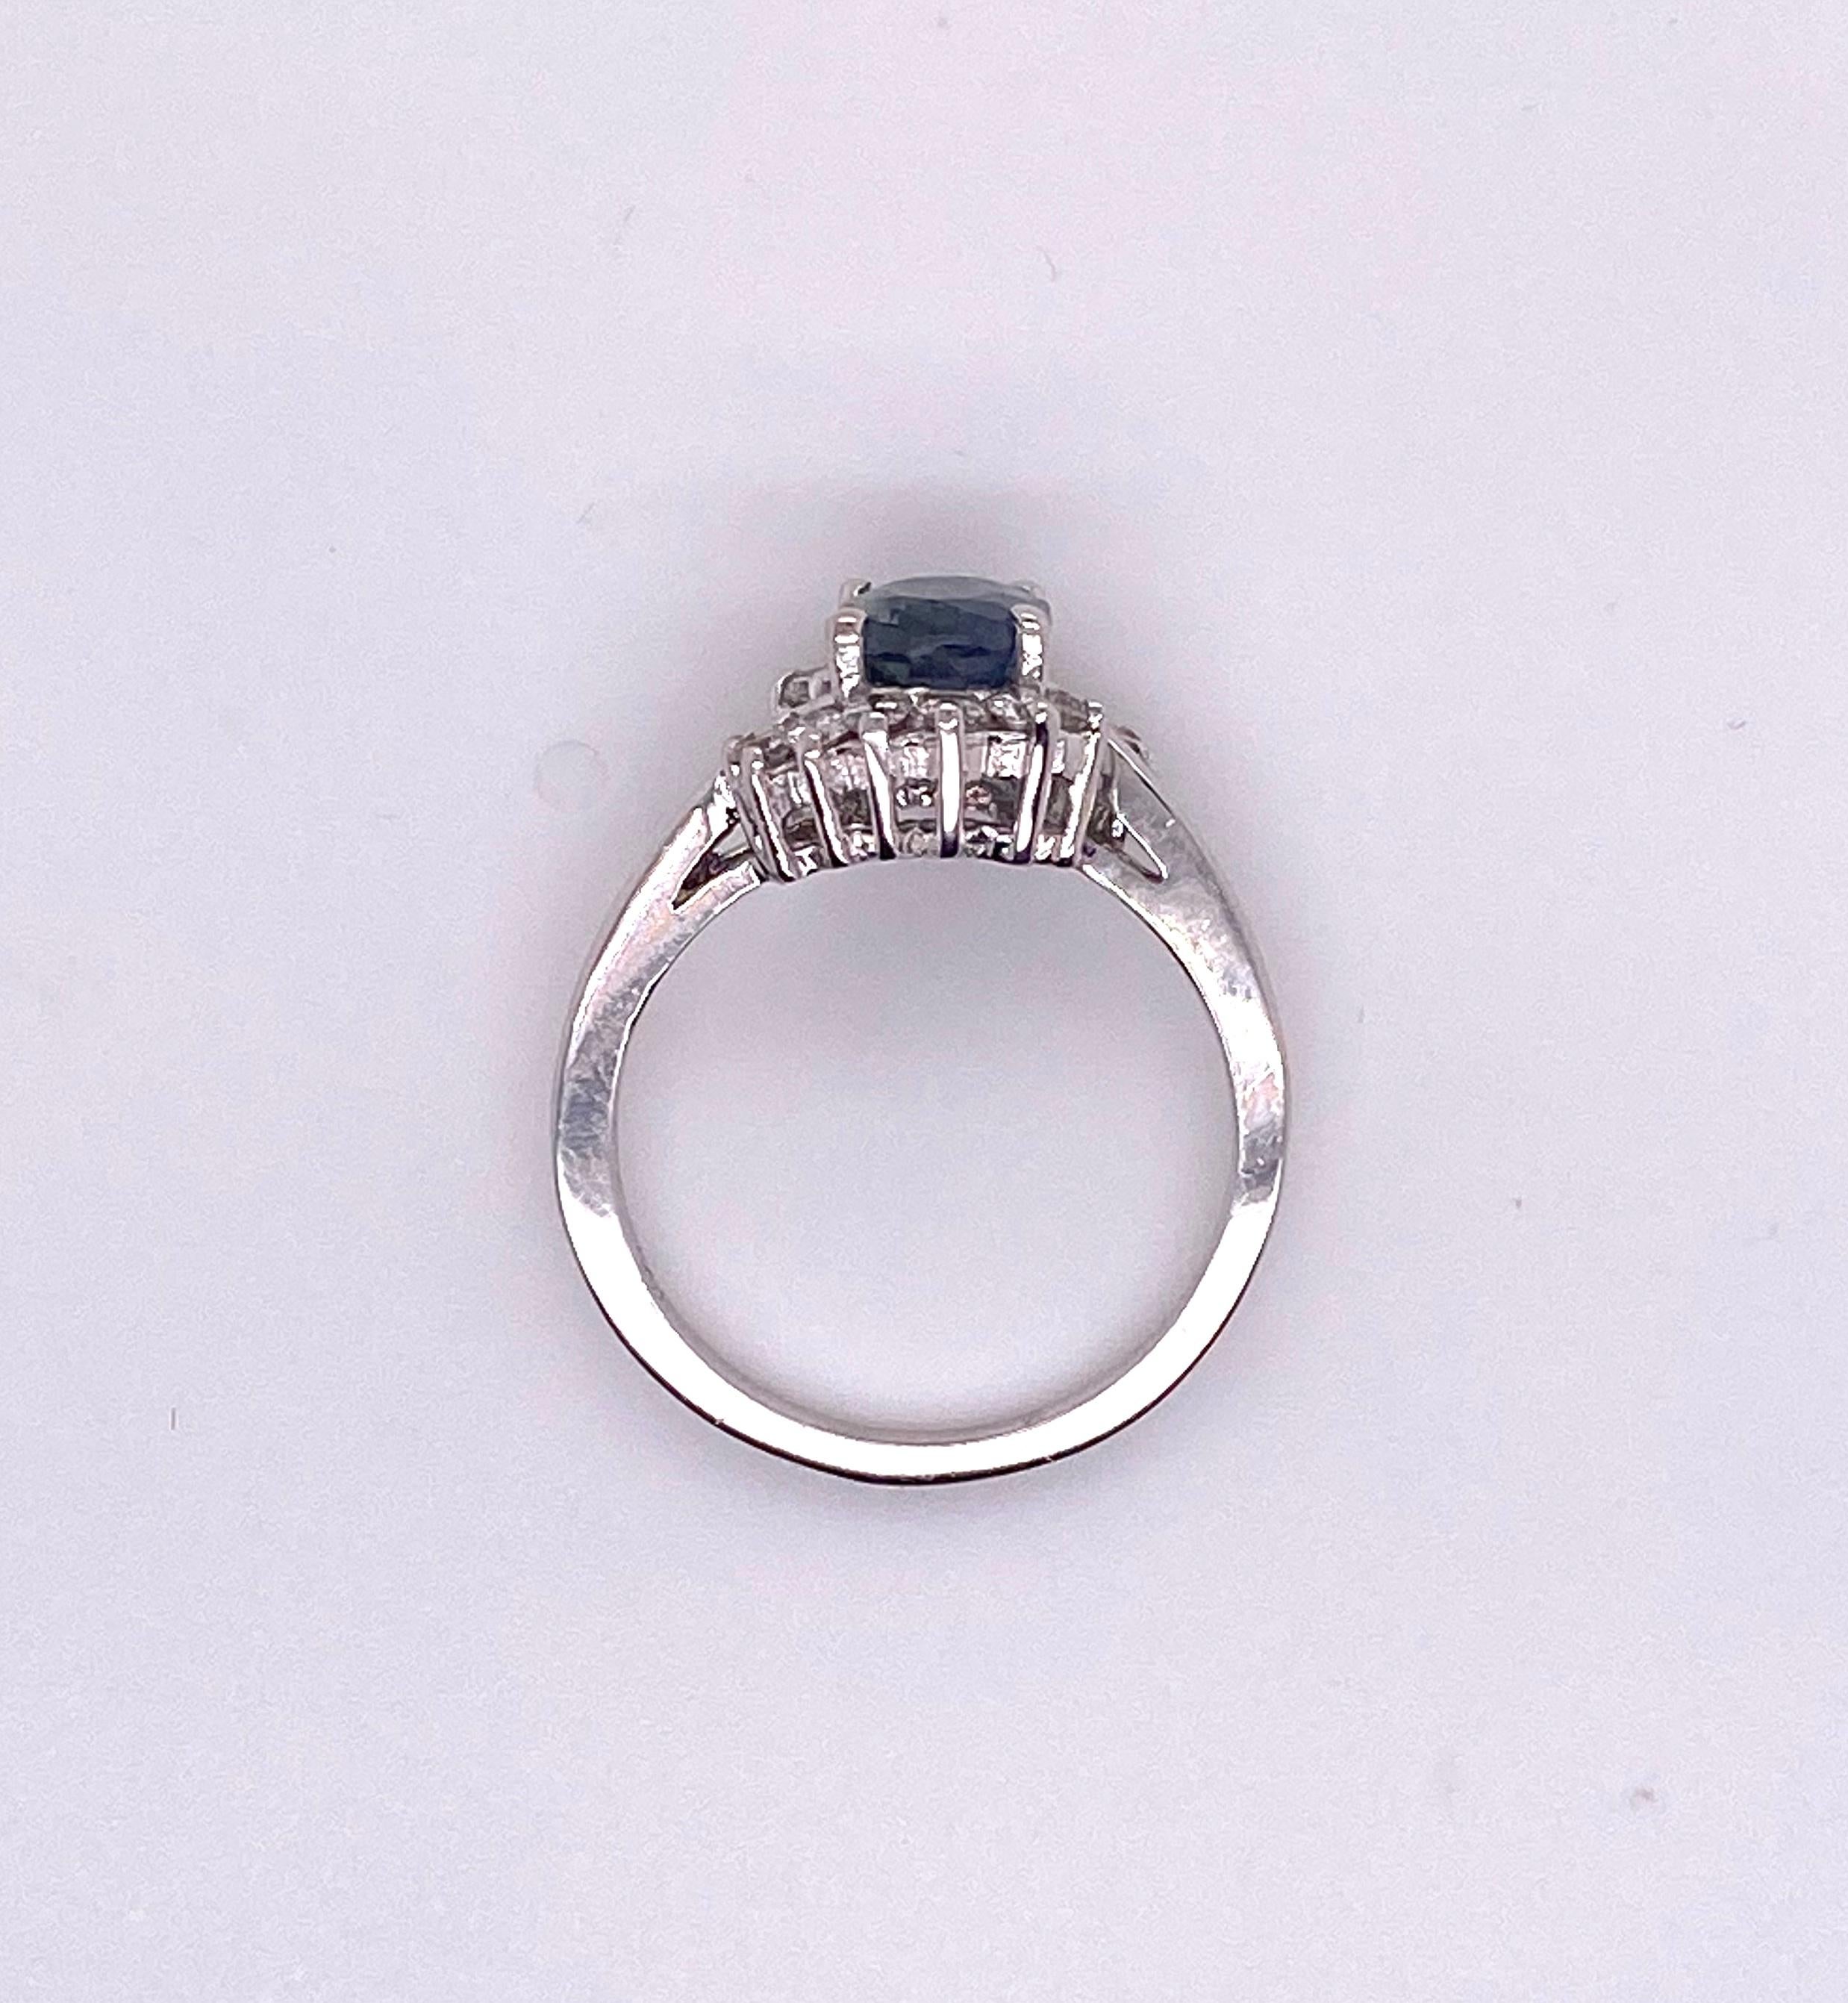 Oval Cut 1.28 Carat Rare Alexandrite and Diamond Cocktail Ring in White Gold